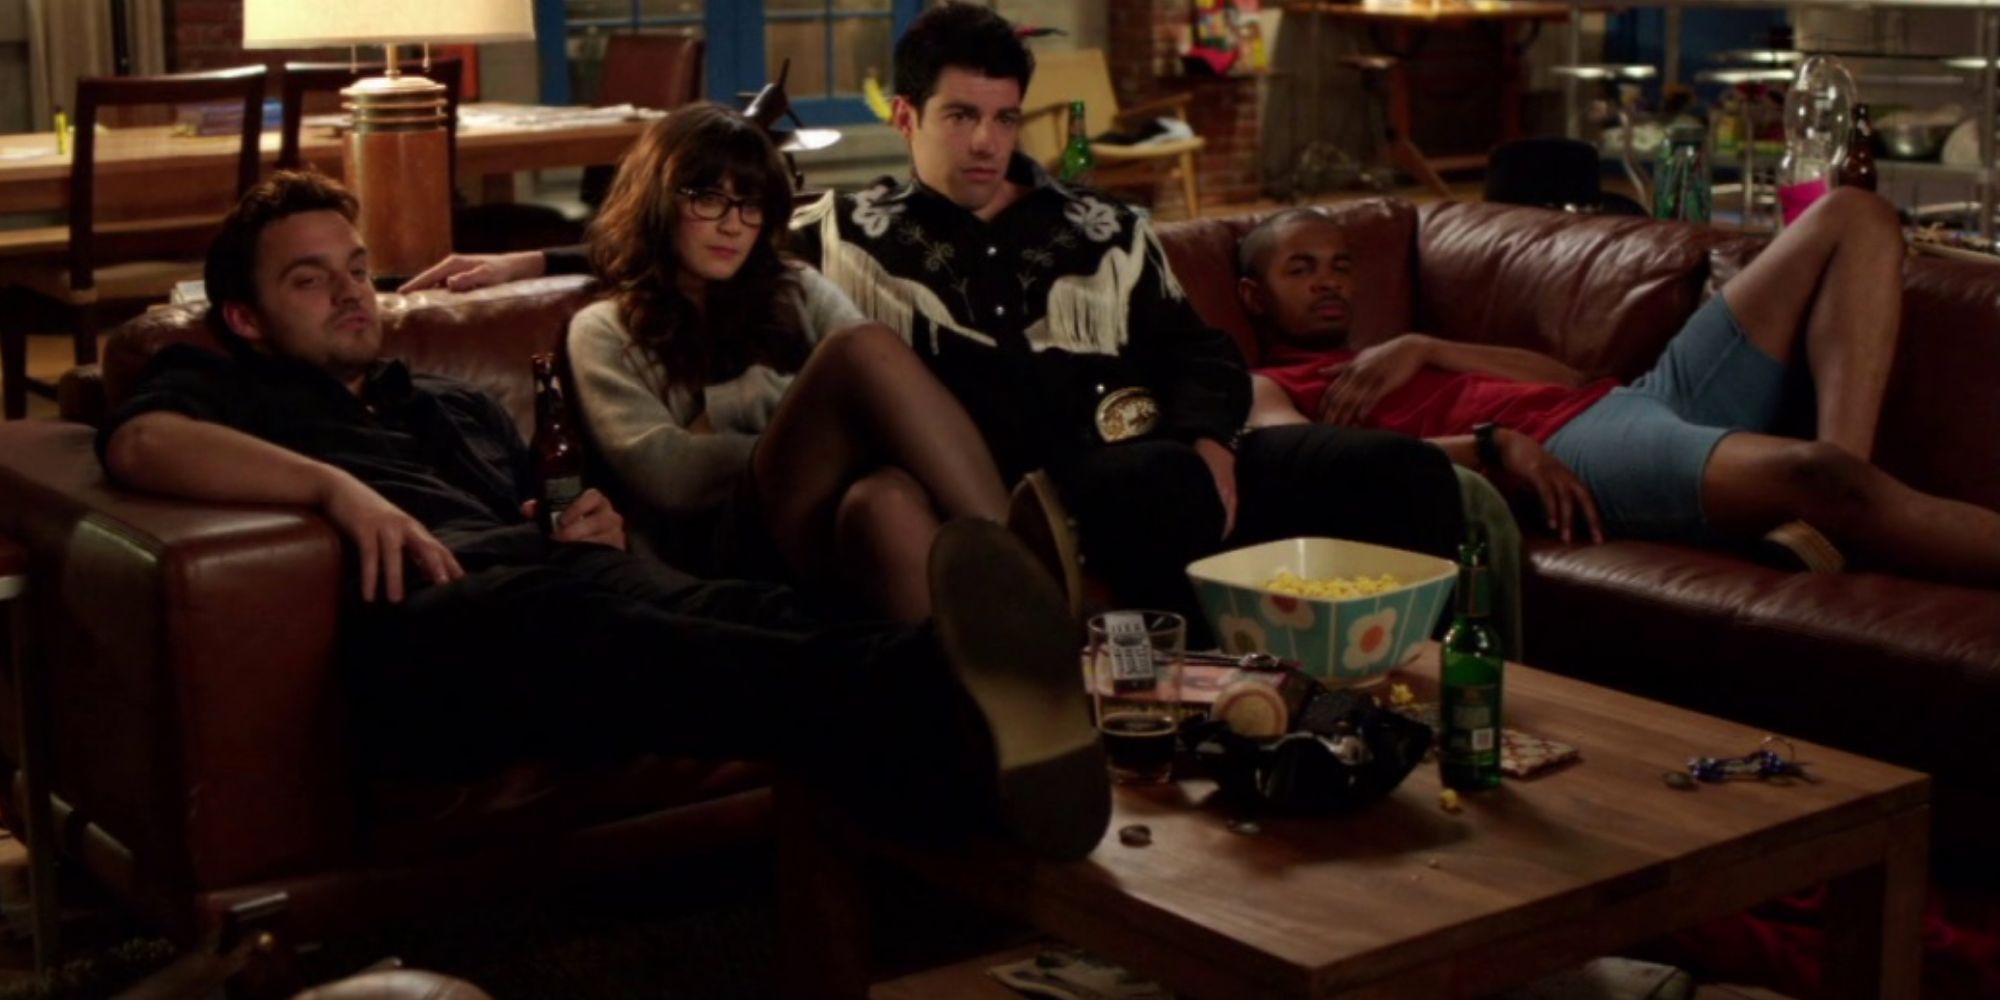 Nick, Jess, Schmidt, and Coach on the couch in the New Girl pilot